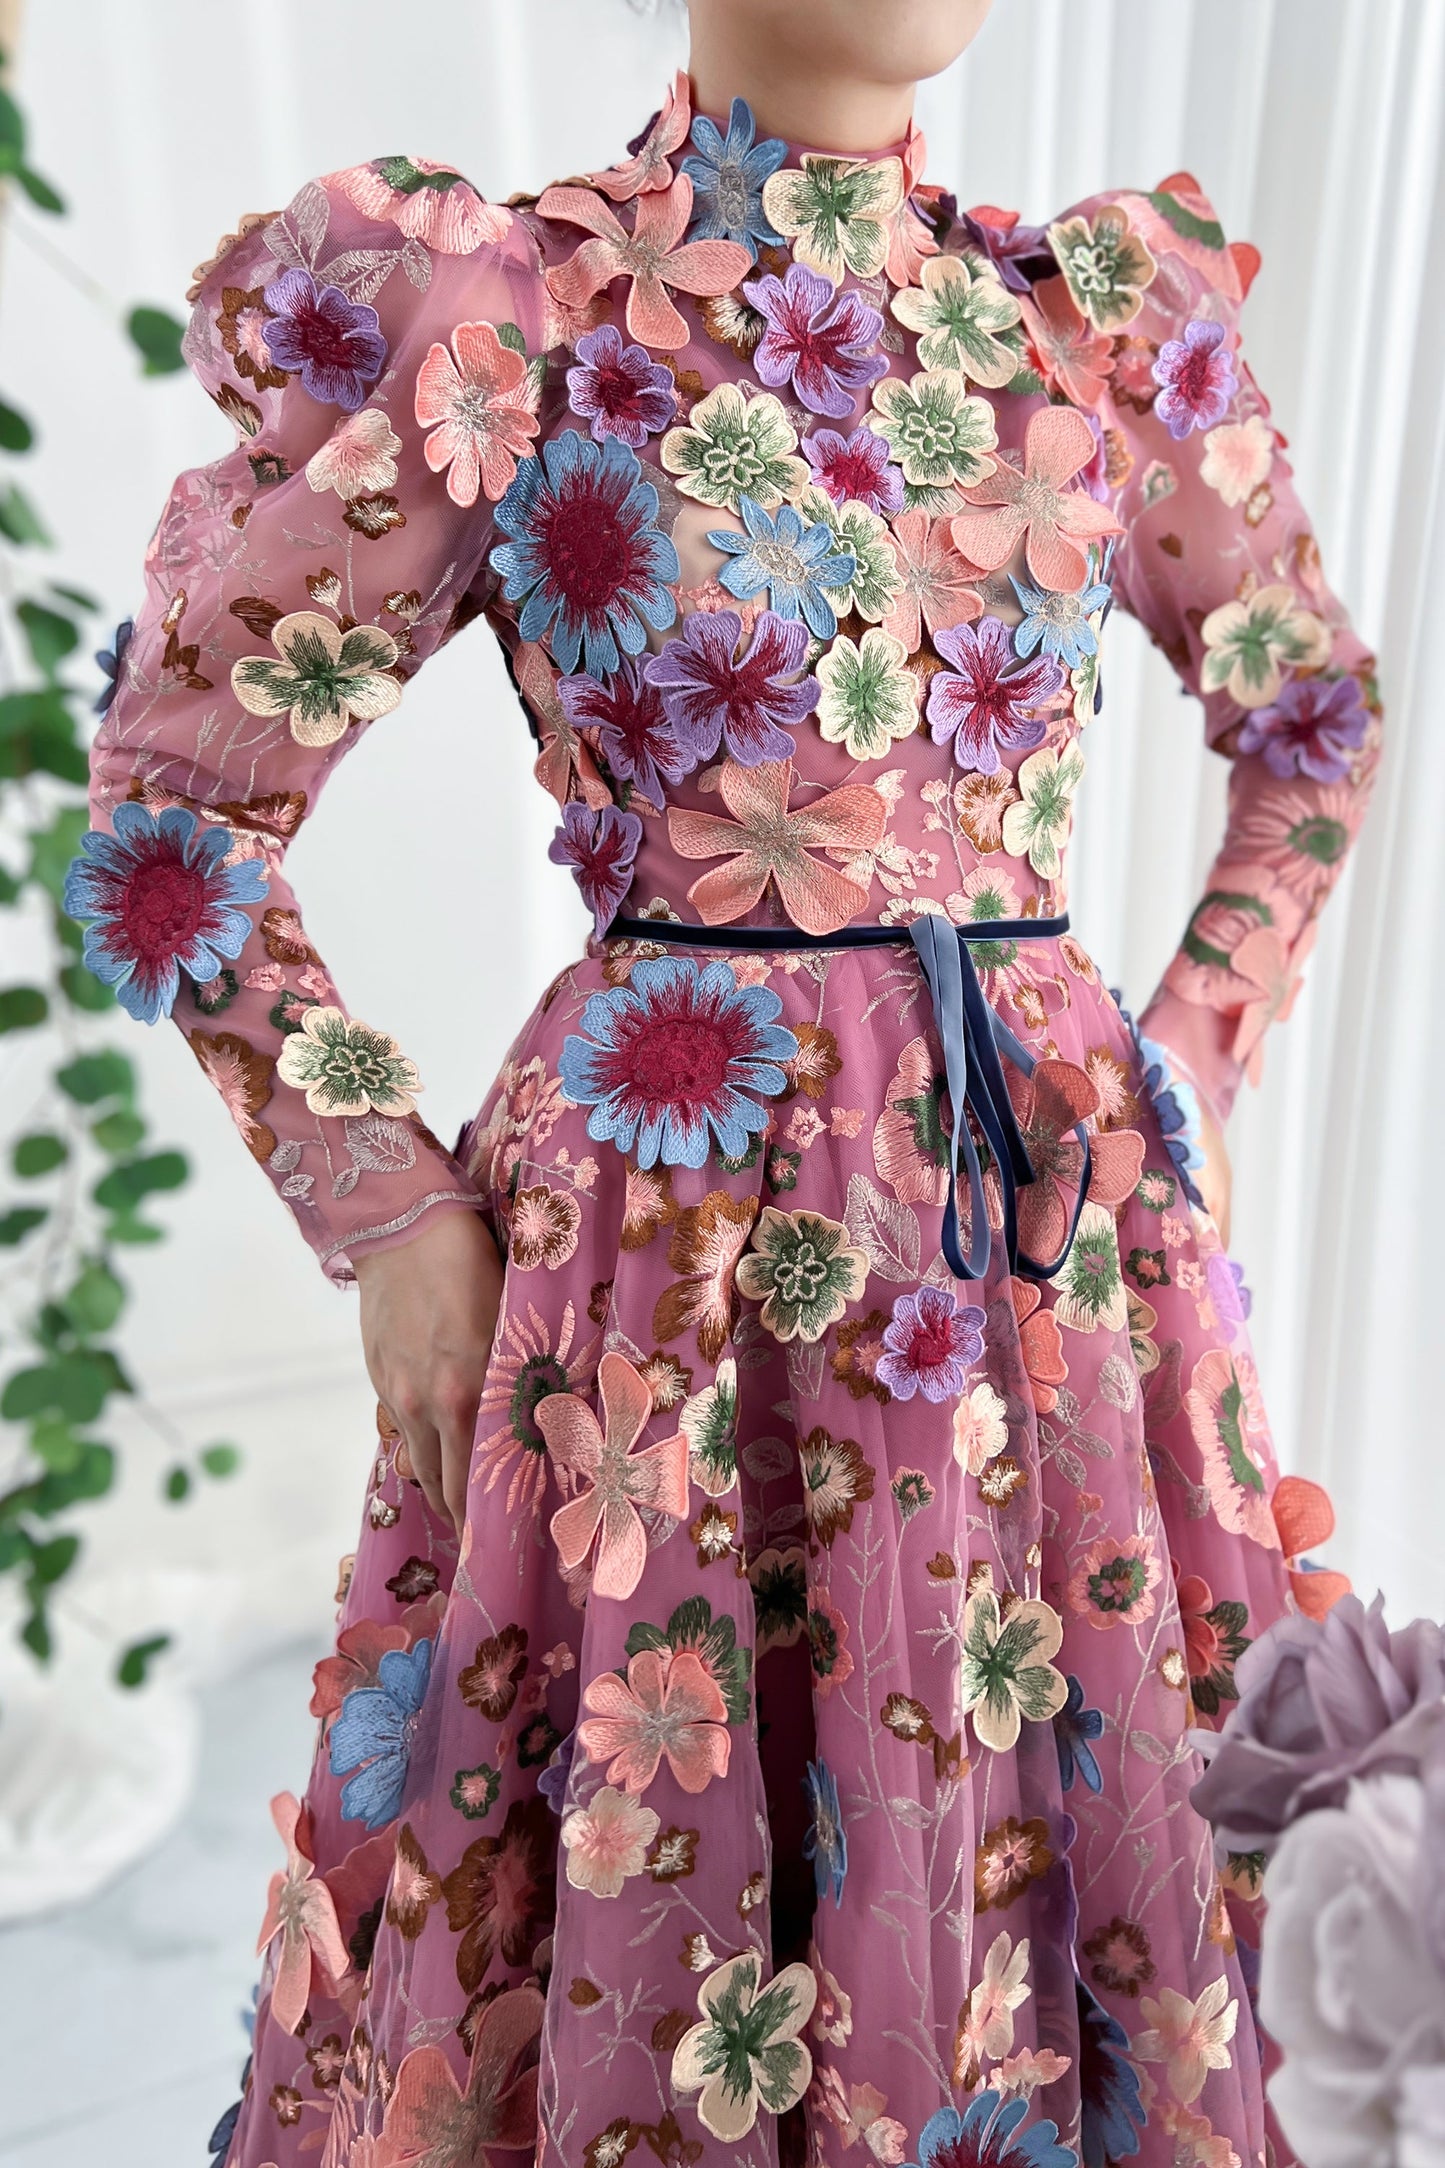 Leg-of-mutton Sleeves Emboridery Floral Dress with Open Back